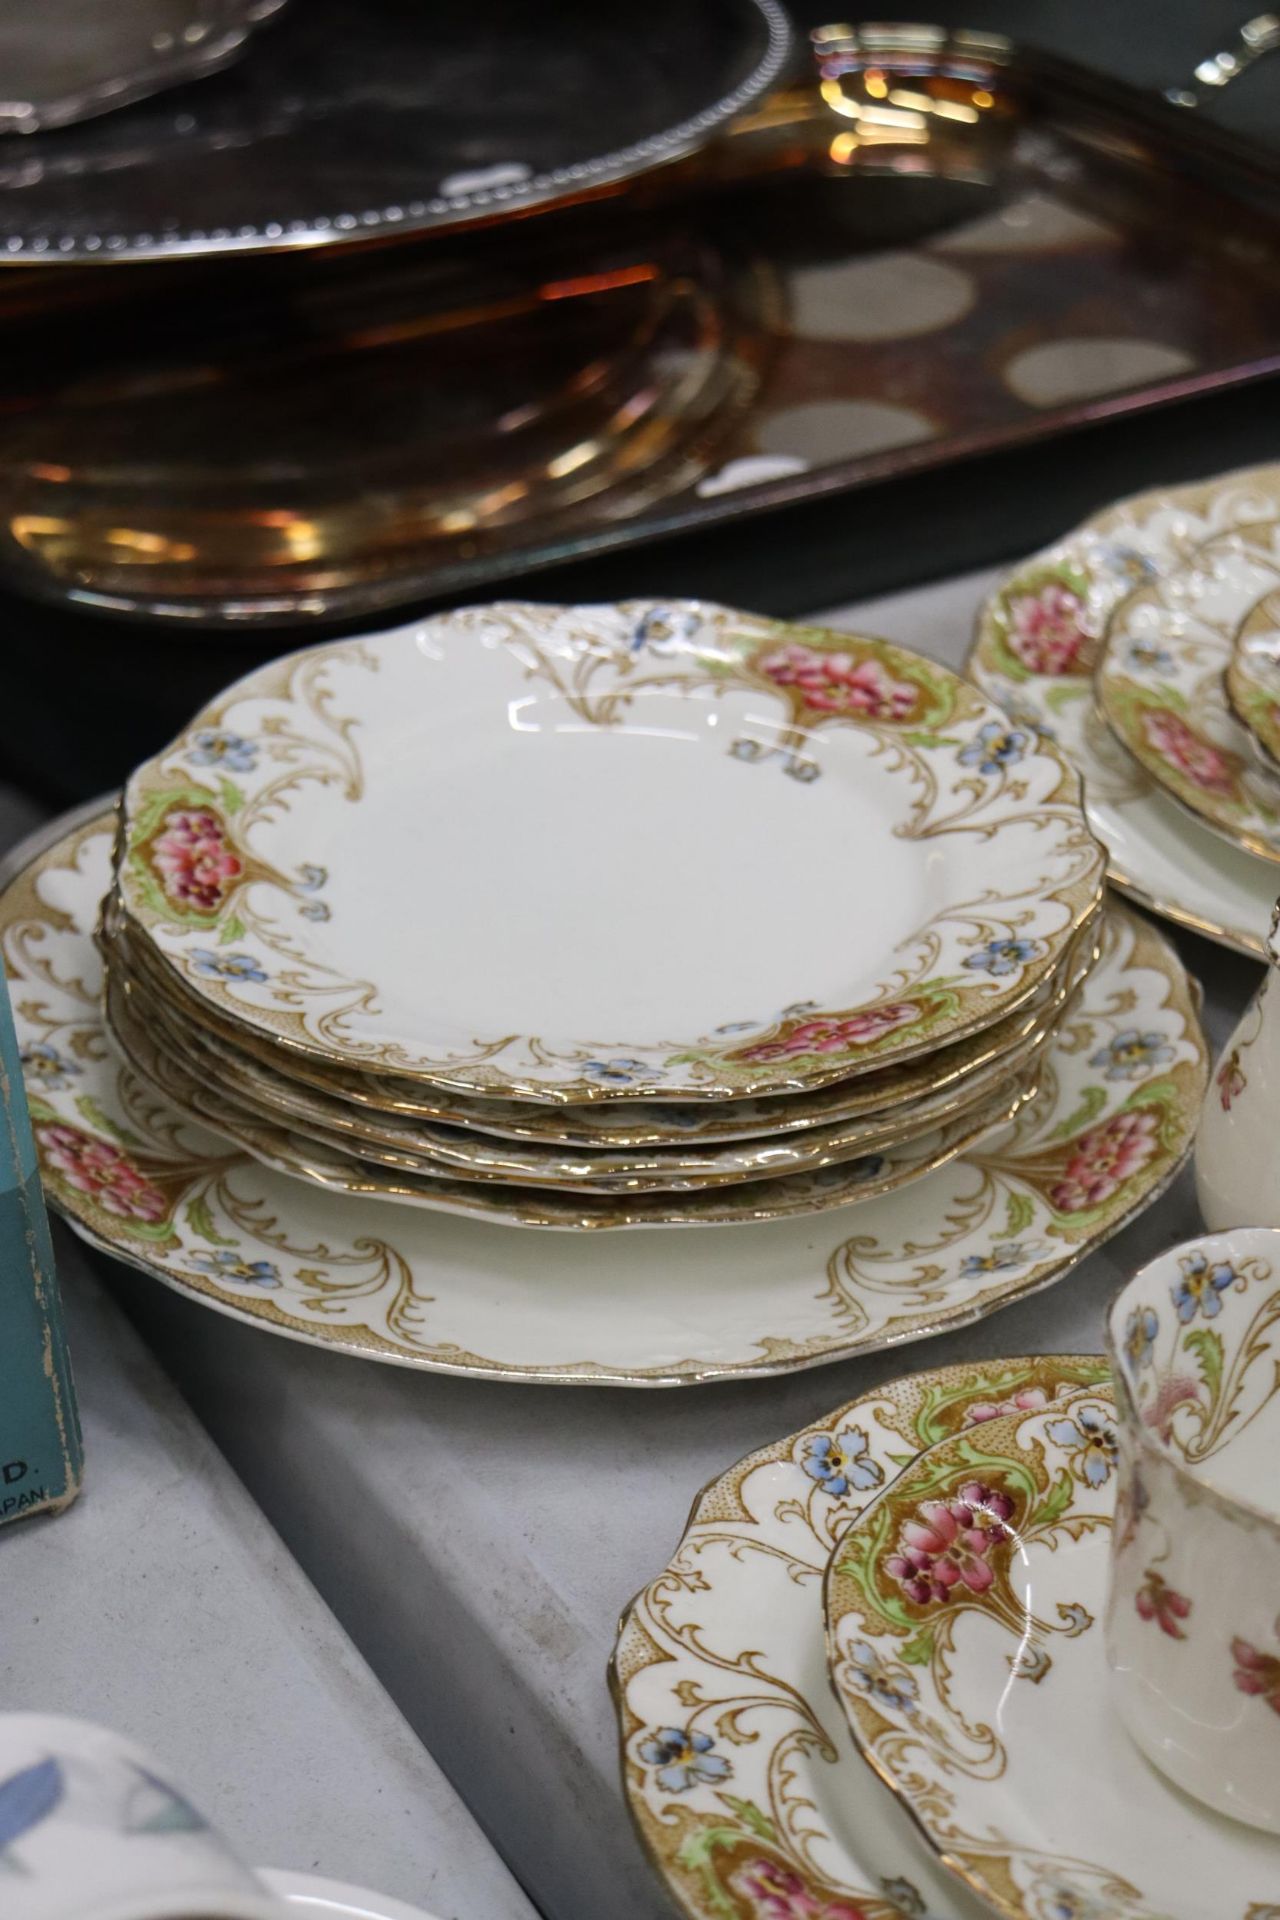 A LATE 18TH/EARLY 19TH CENTURY TEASET BY FRED B PEARCE & CO, LONDON, TO INCLUDE CAKE PLATES, A CREAM - Image 4 of 10